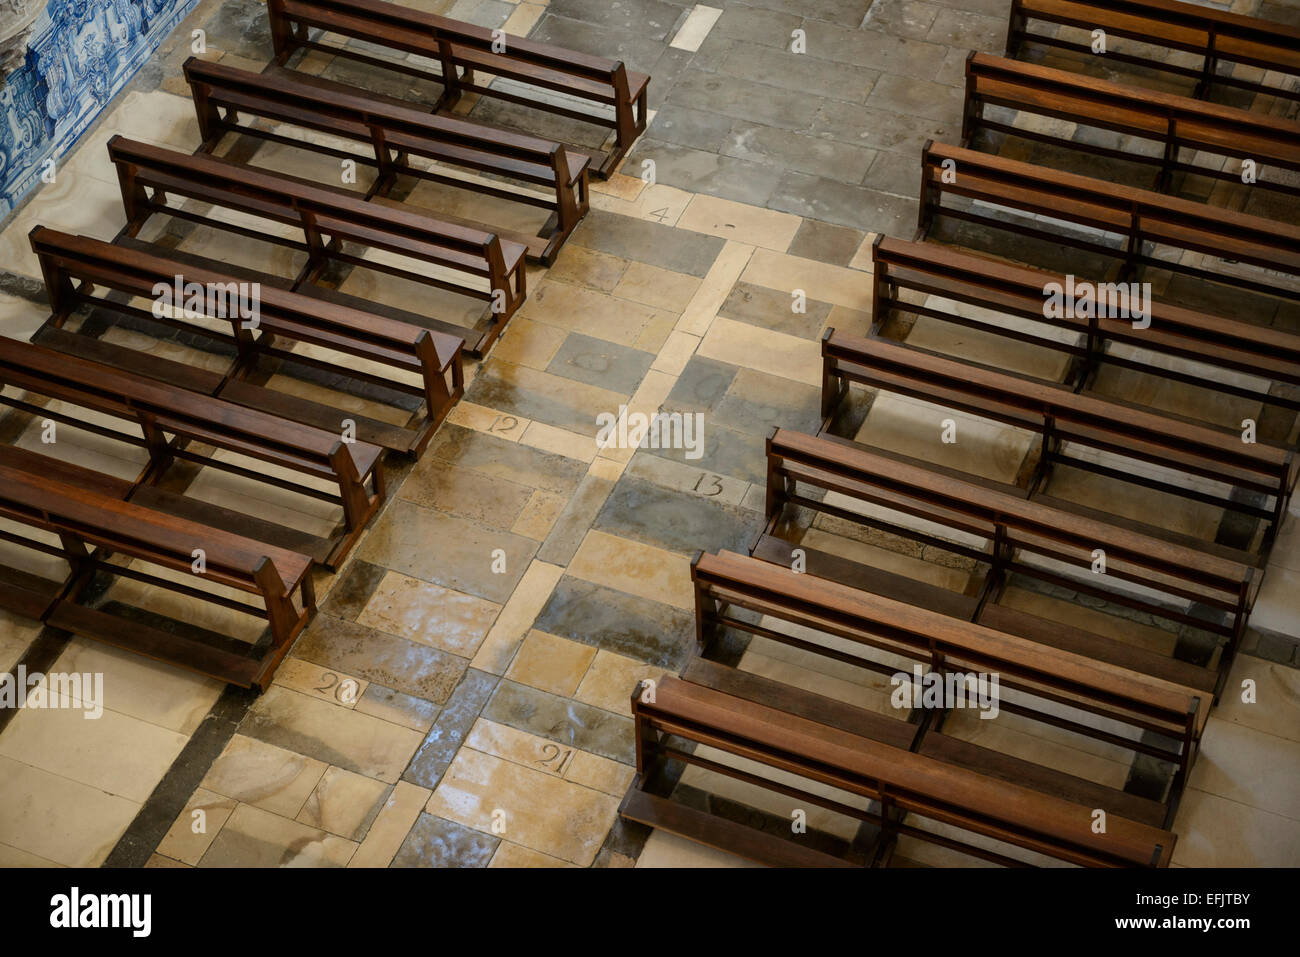 Church pews viewed from above Stock Photo